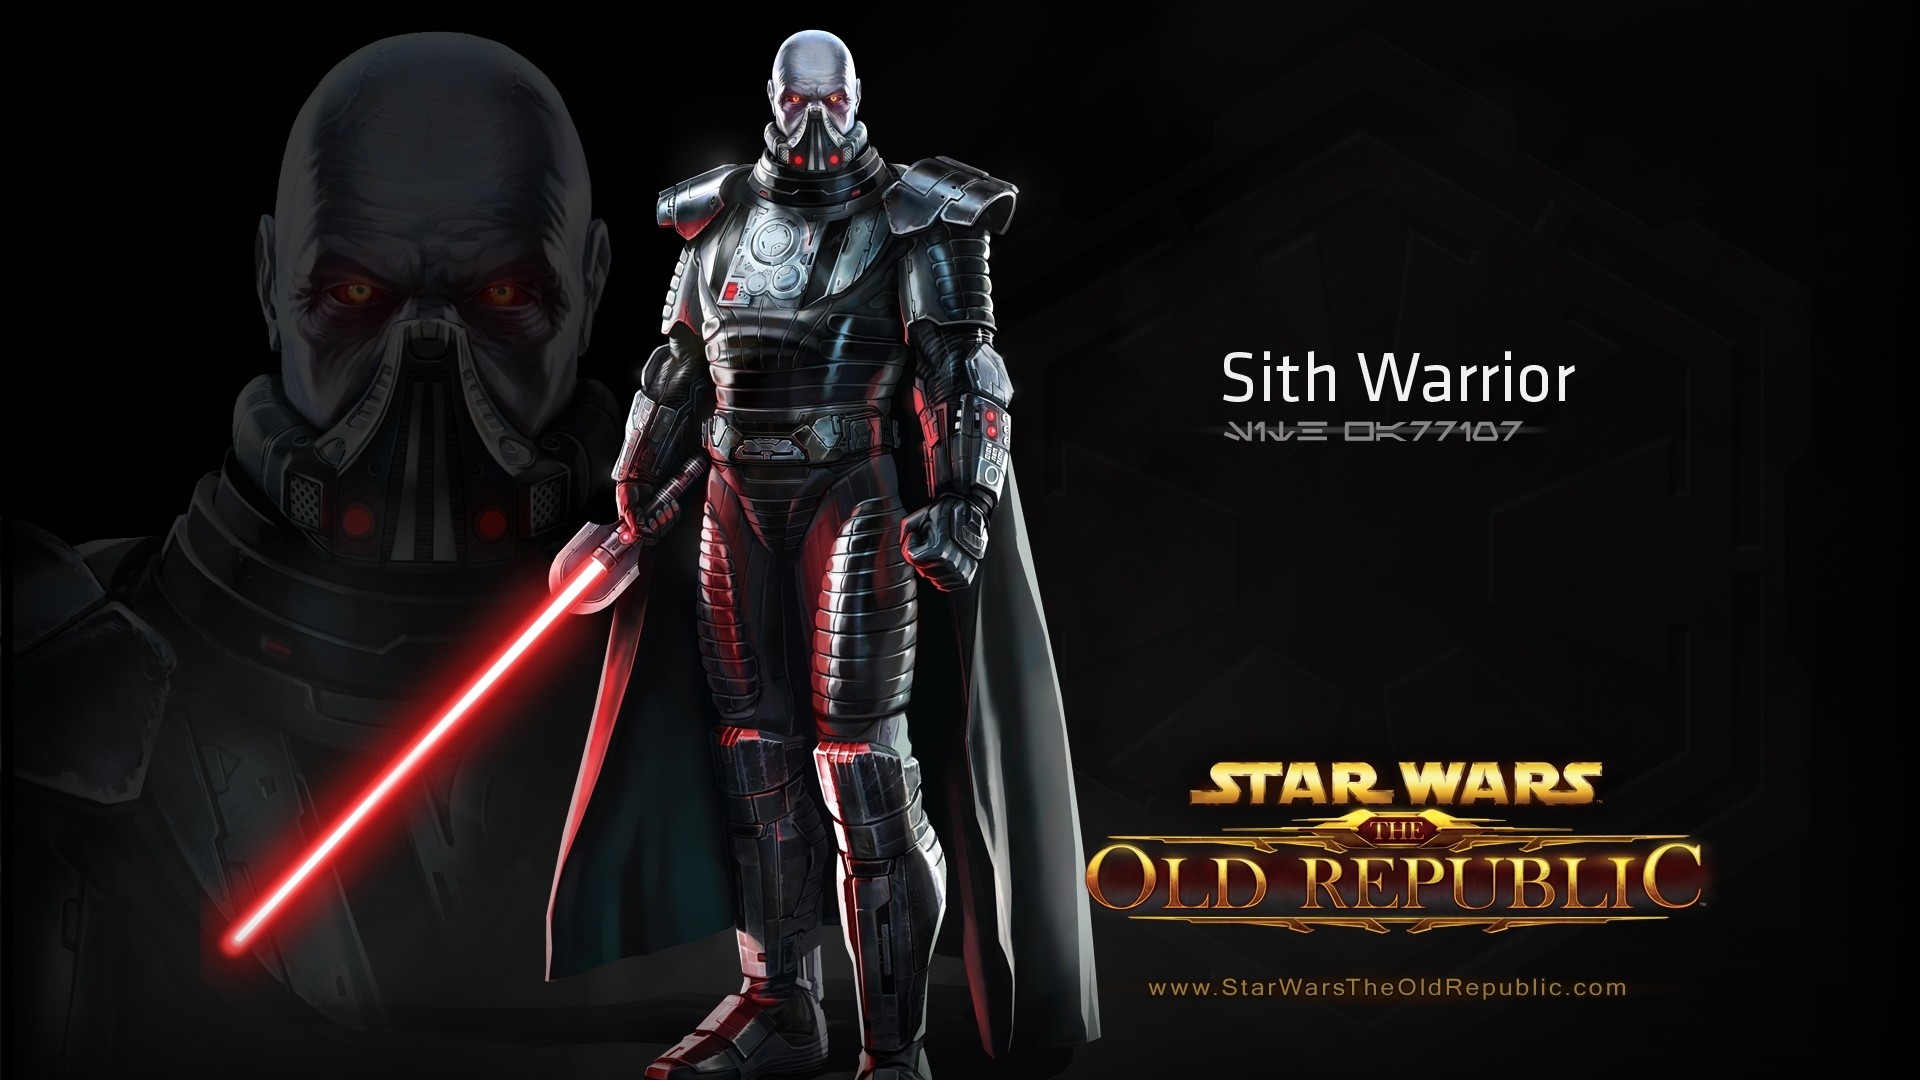 1920x1080  Wallpaper star wars the old republic, sith warrior, character,  lightsaber